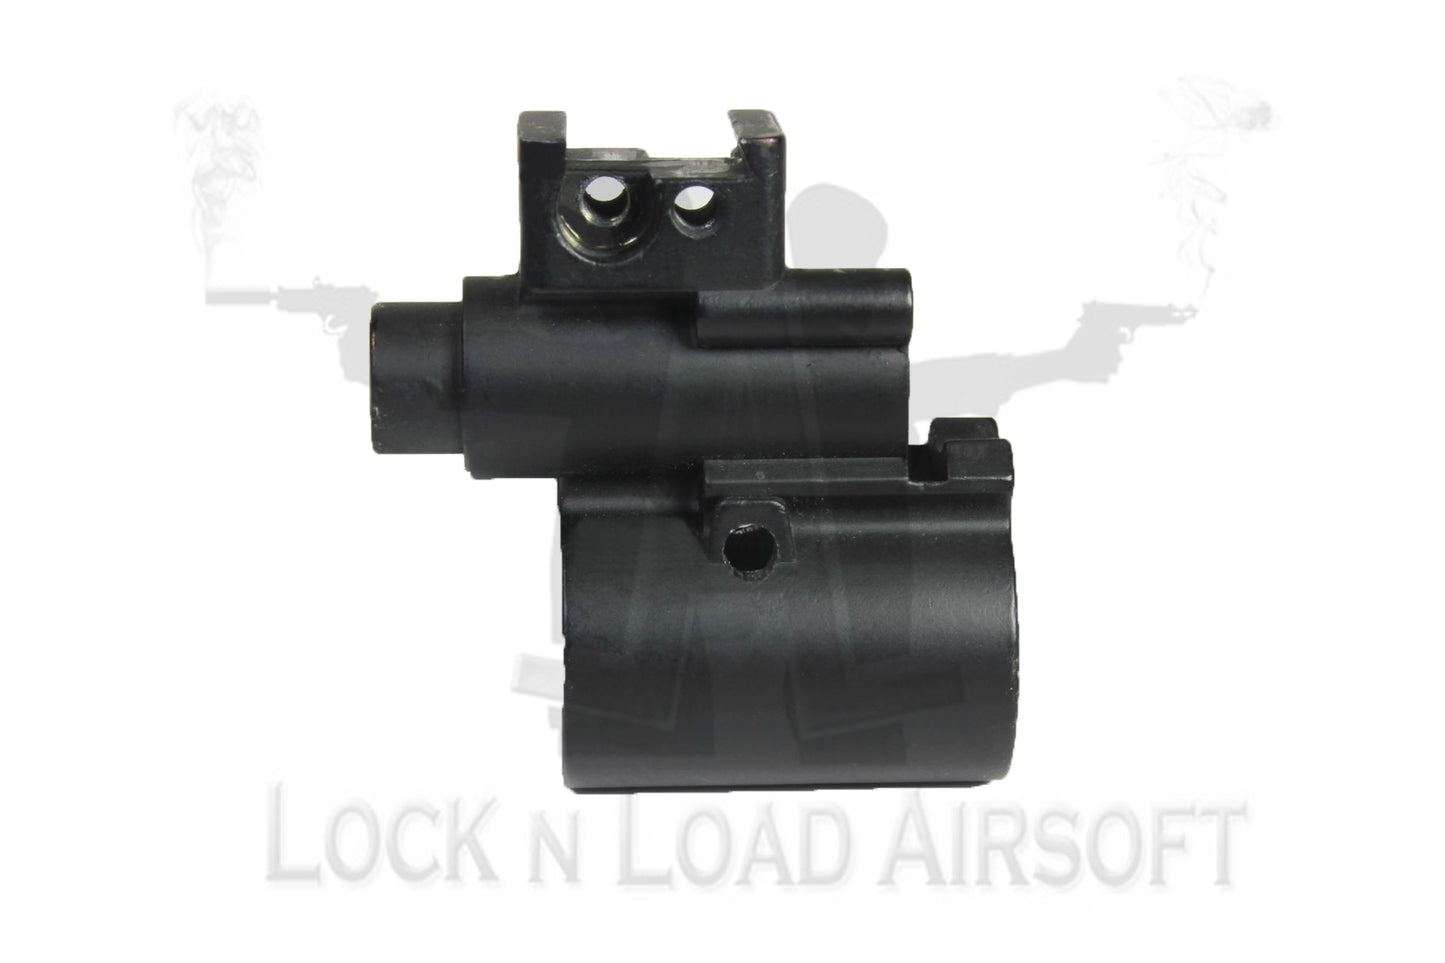 Full Metal SCAR Front Sight Base | Gas Block Replacement Core Unit